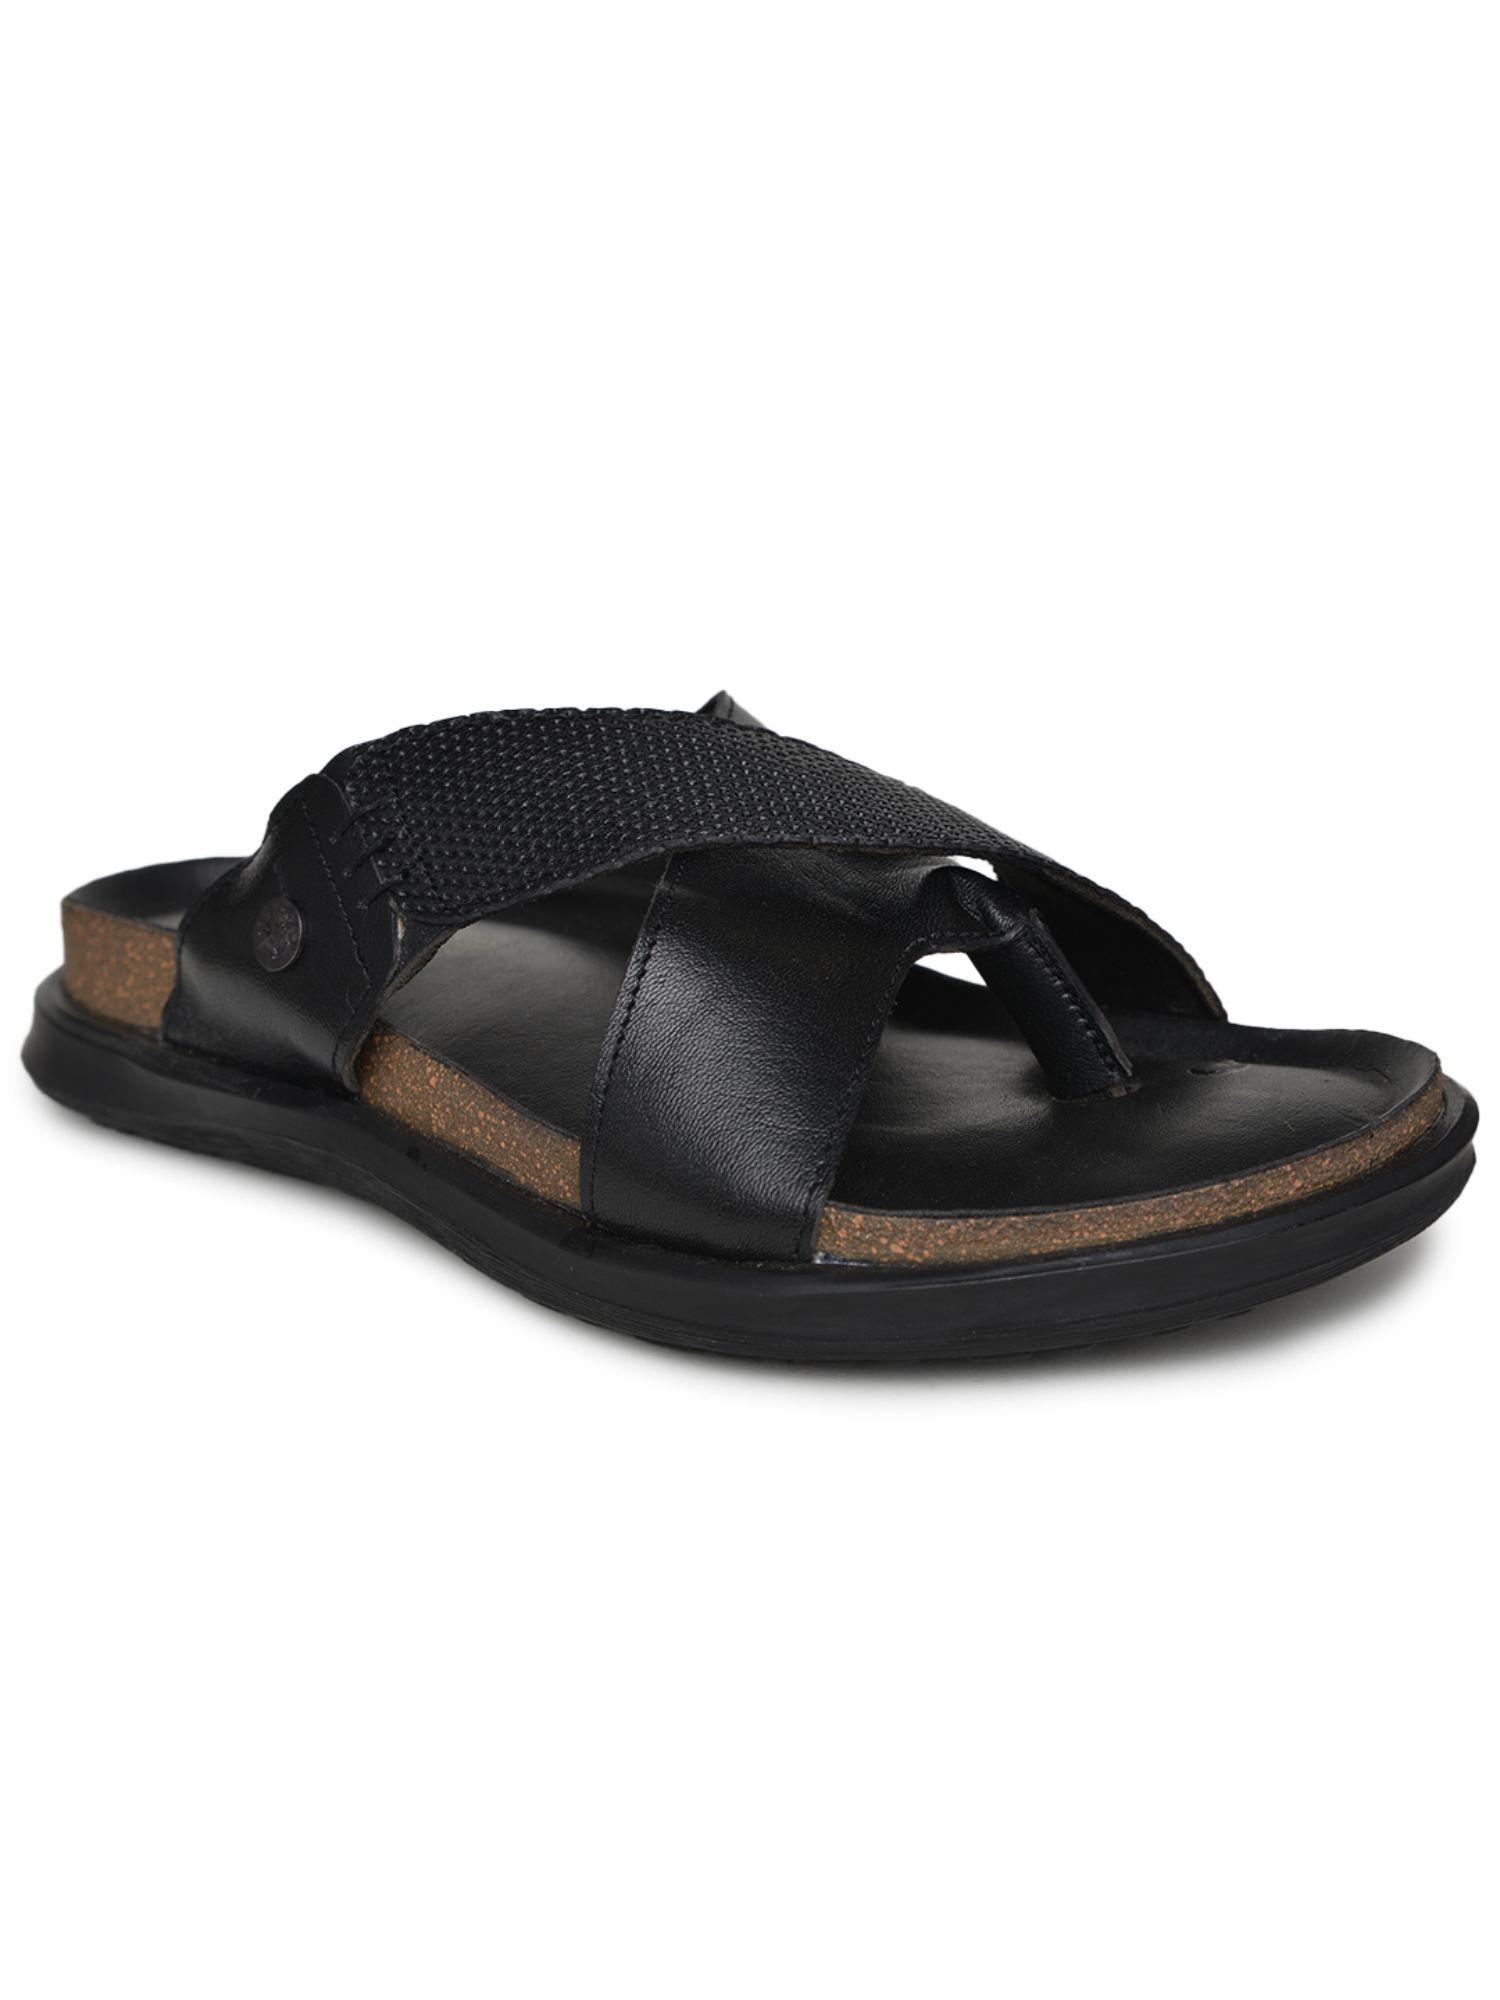 Feest Genuine Leather Casual Sandals for Mens